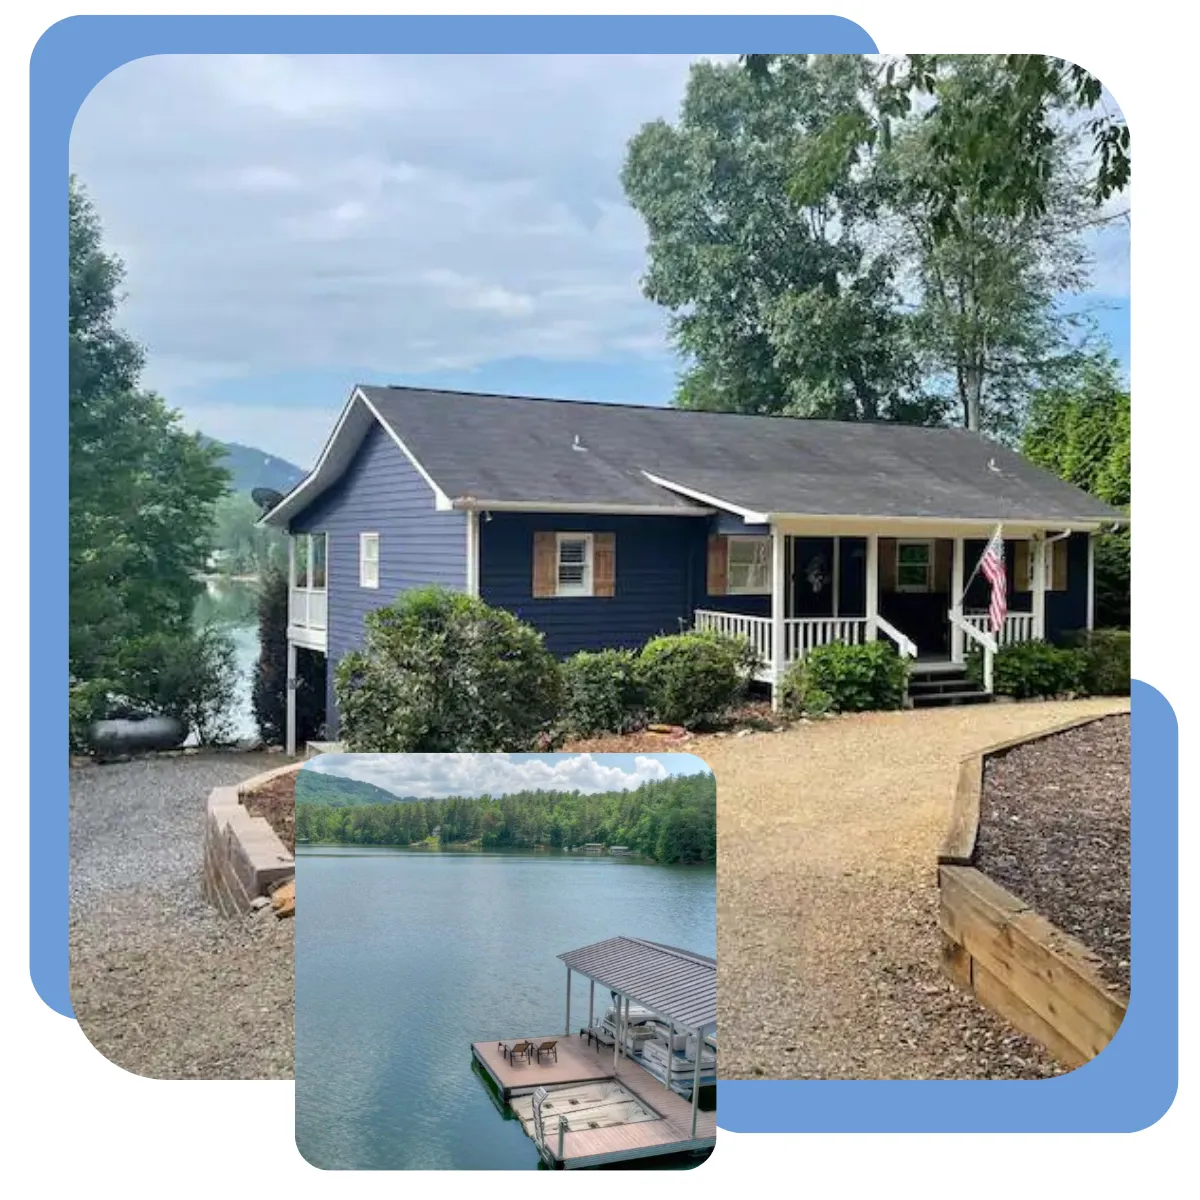 At Sweetwater Cottage in Blairsville near Lake Nottely, enjoy a freshly updated stay with three cozy bedrooms and baths, perfect for up to 8 guests (ideal for 6 adults) and dog-friendly too! Get ready to grill and relax with top-quality linens, entertainment, and water toys for endless lake fun.